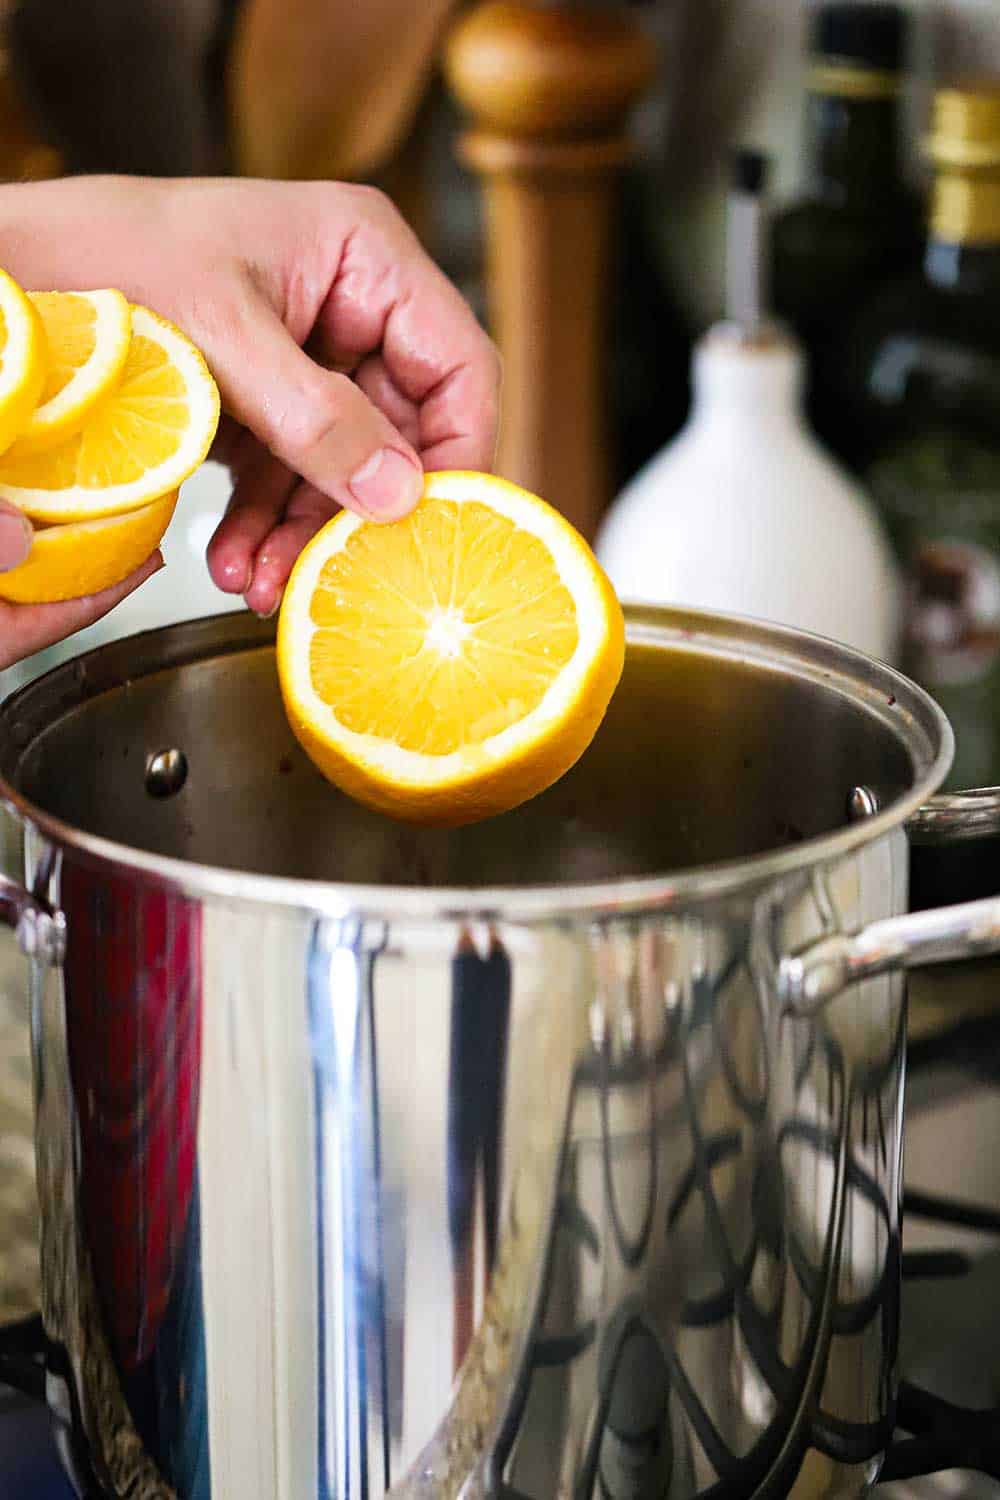 A hand dropping an orange slice into a large silver pot on the stove.